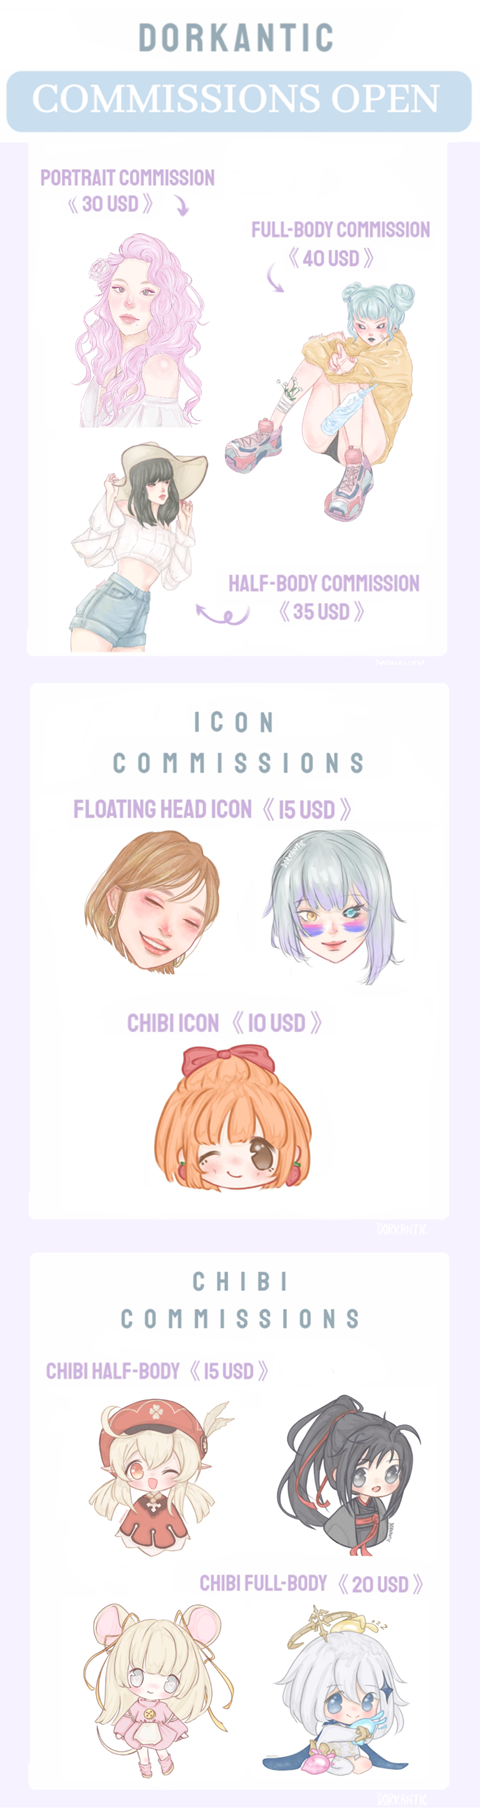 EMERGENCY COMMISSIONS!